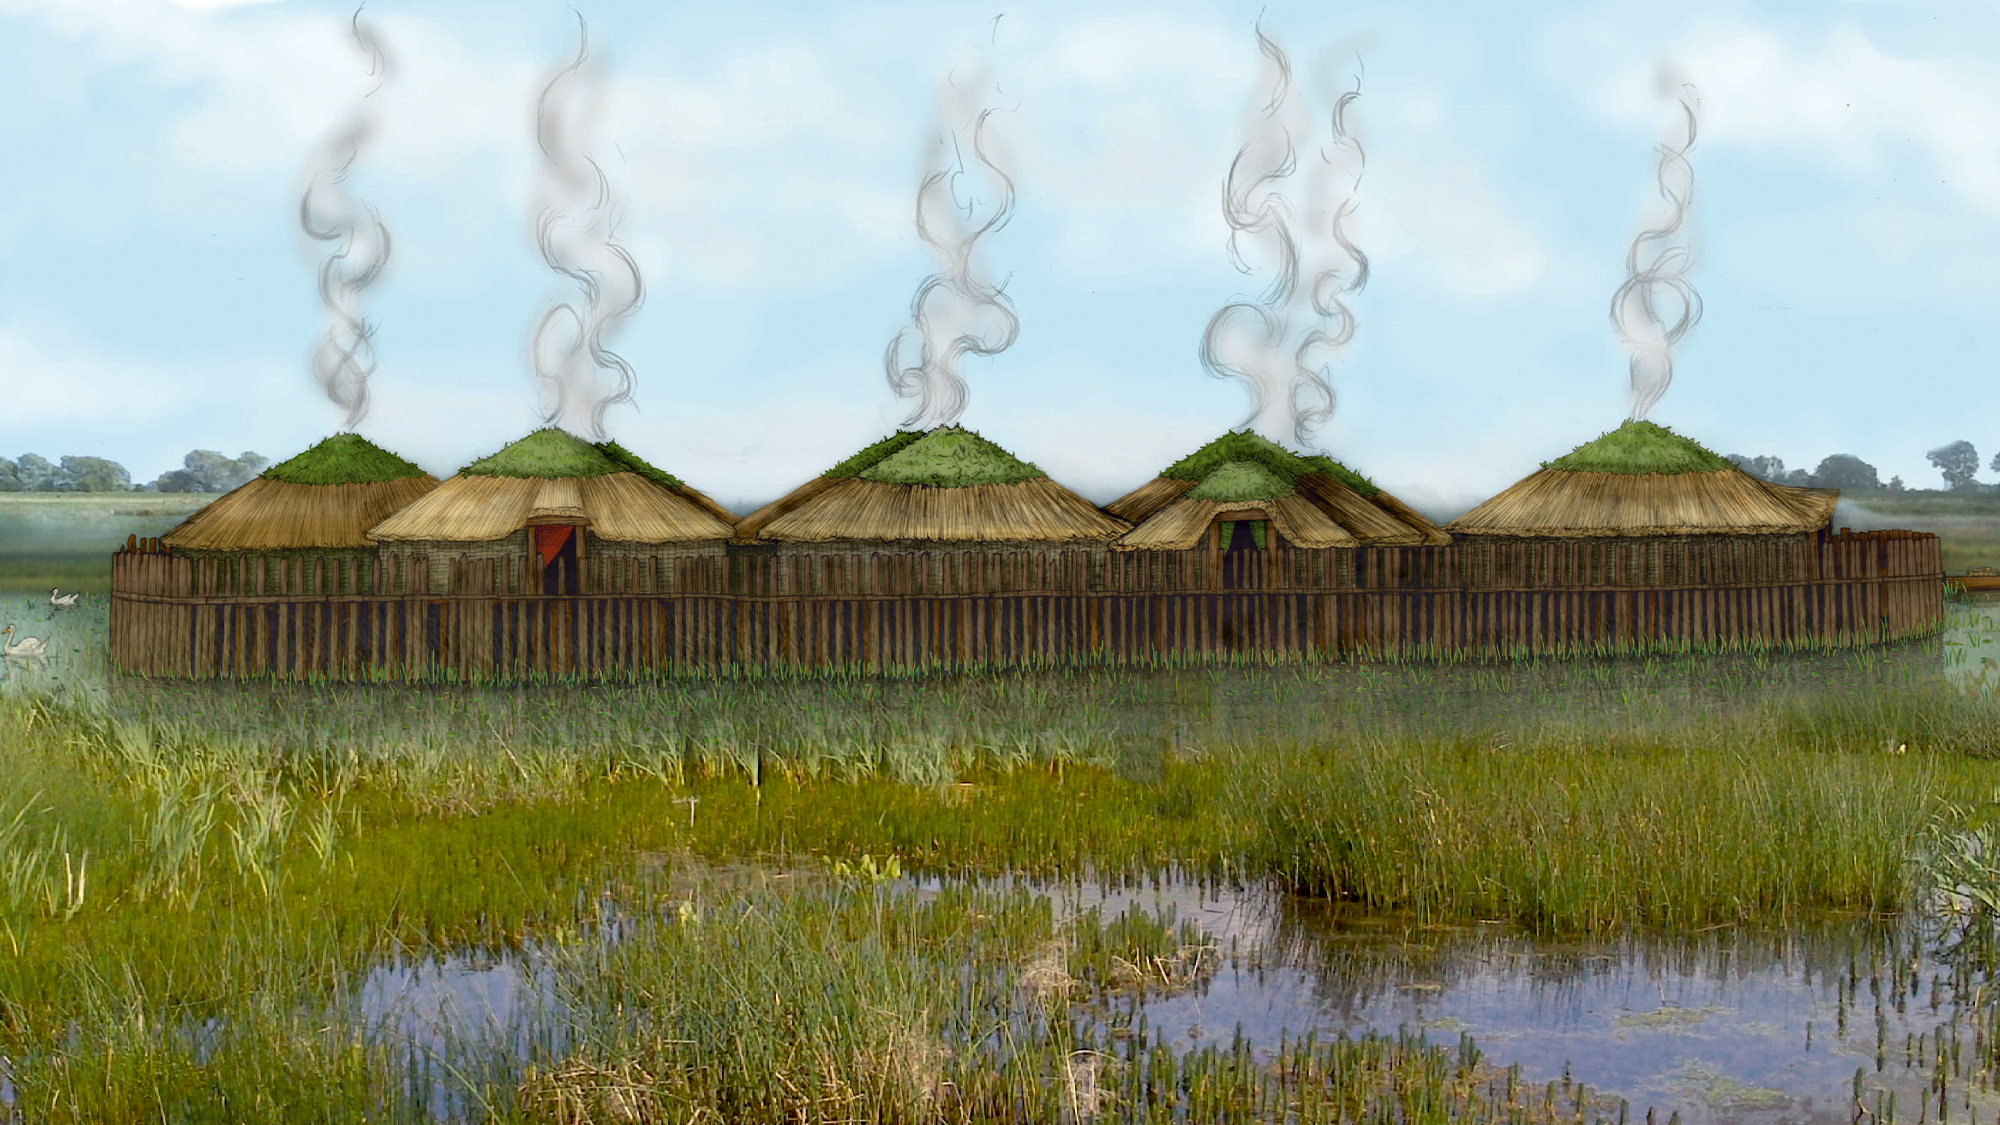 An illustration of the Bronze Age stilt settlement uncovered at Must Farm in eastern England. Five circular dwellings stand above a boggy wetland.